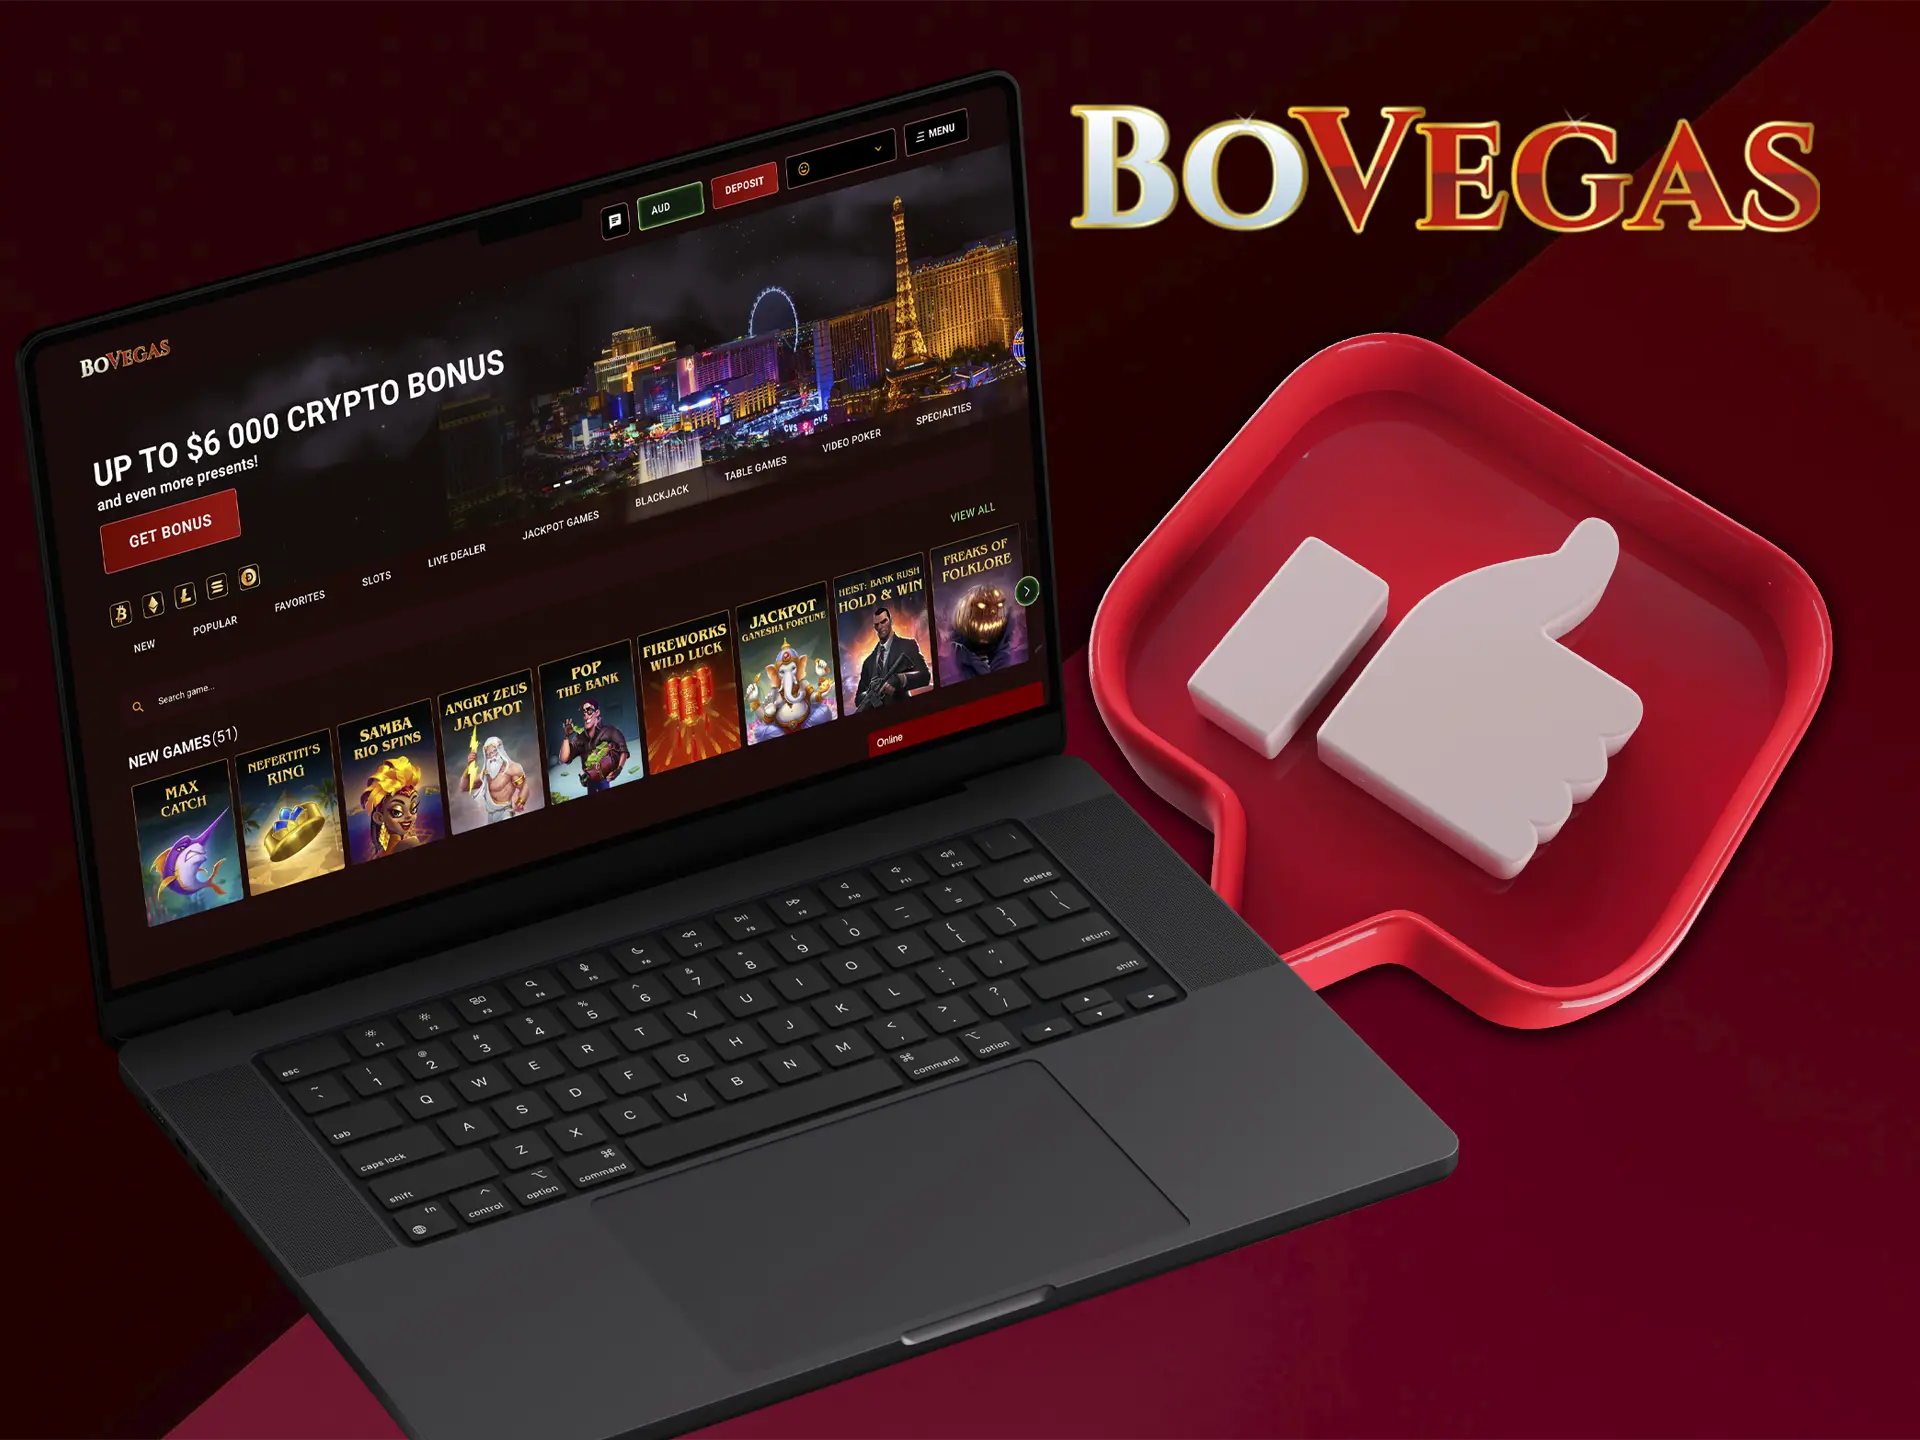 Be confident in your choice of BoVegas casino, as it is definitely one of the most secure sites.